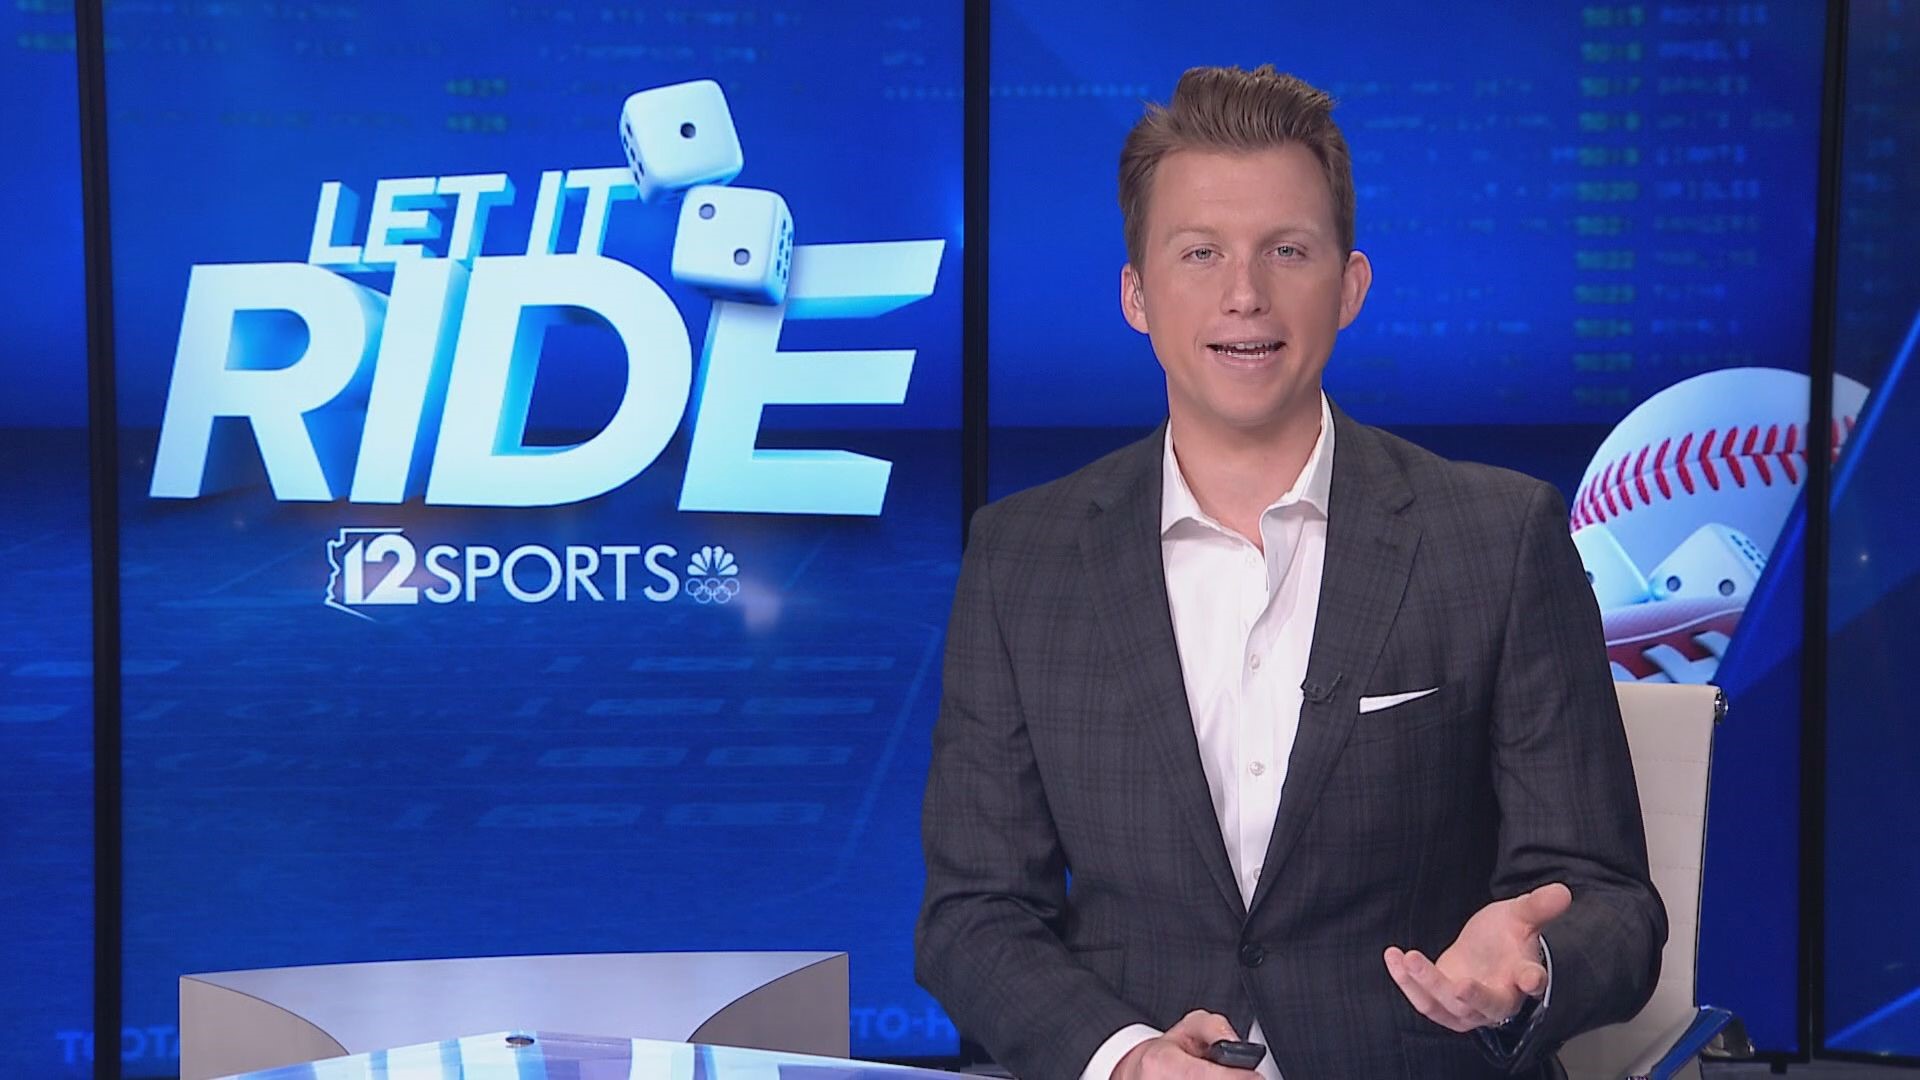 On this episode of Let It Ride, host Luke Lyddon previews the upcoming men's Final Four and the D-backs series against the Atlanta Braves.